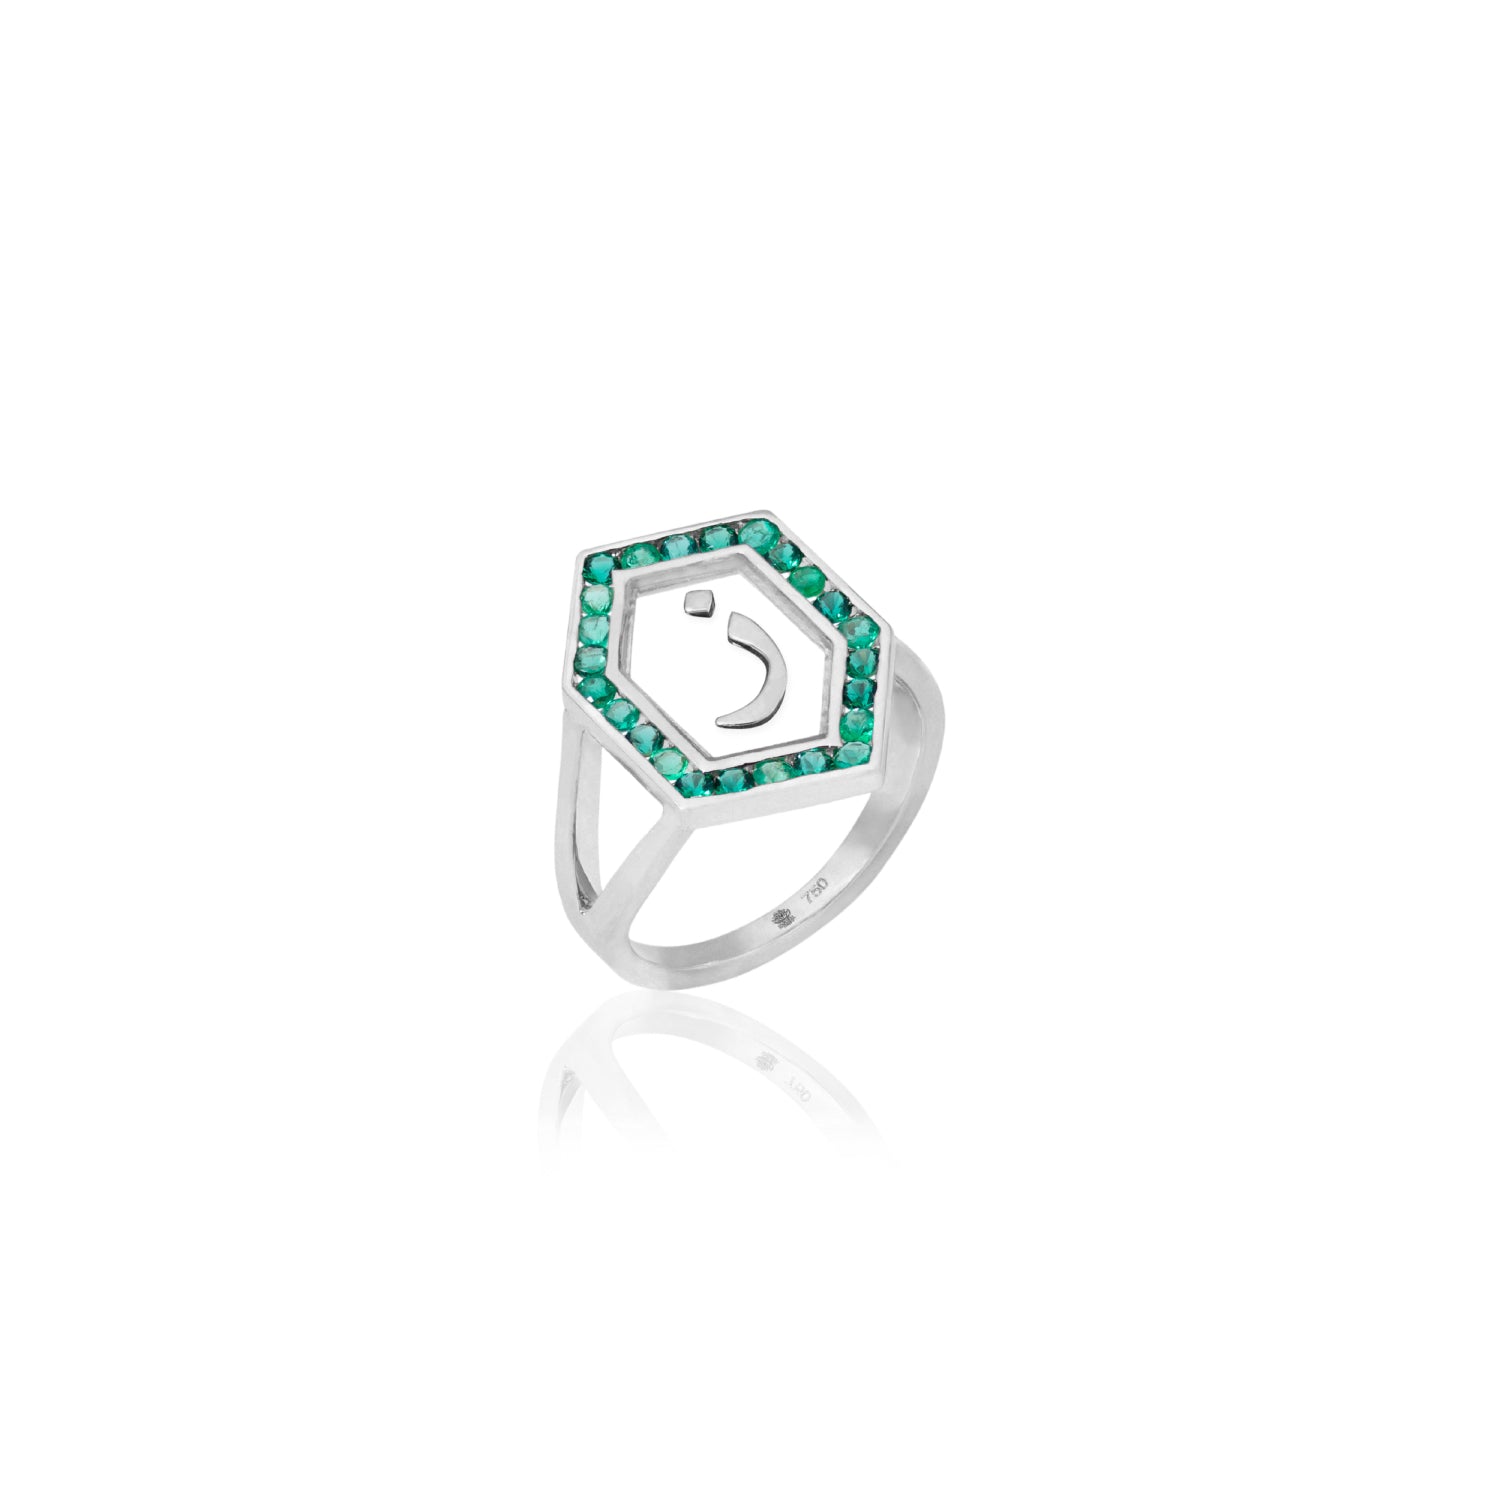 Qamoos 1.0 Letter ز Emerald Ring in White Gold